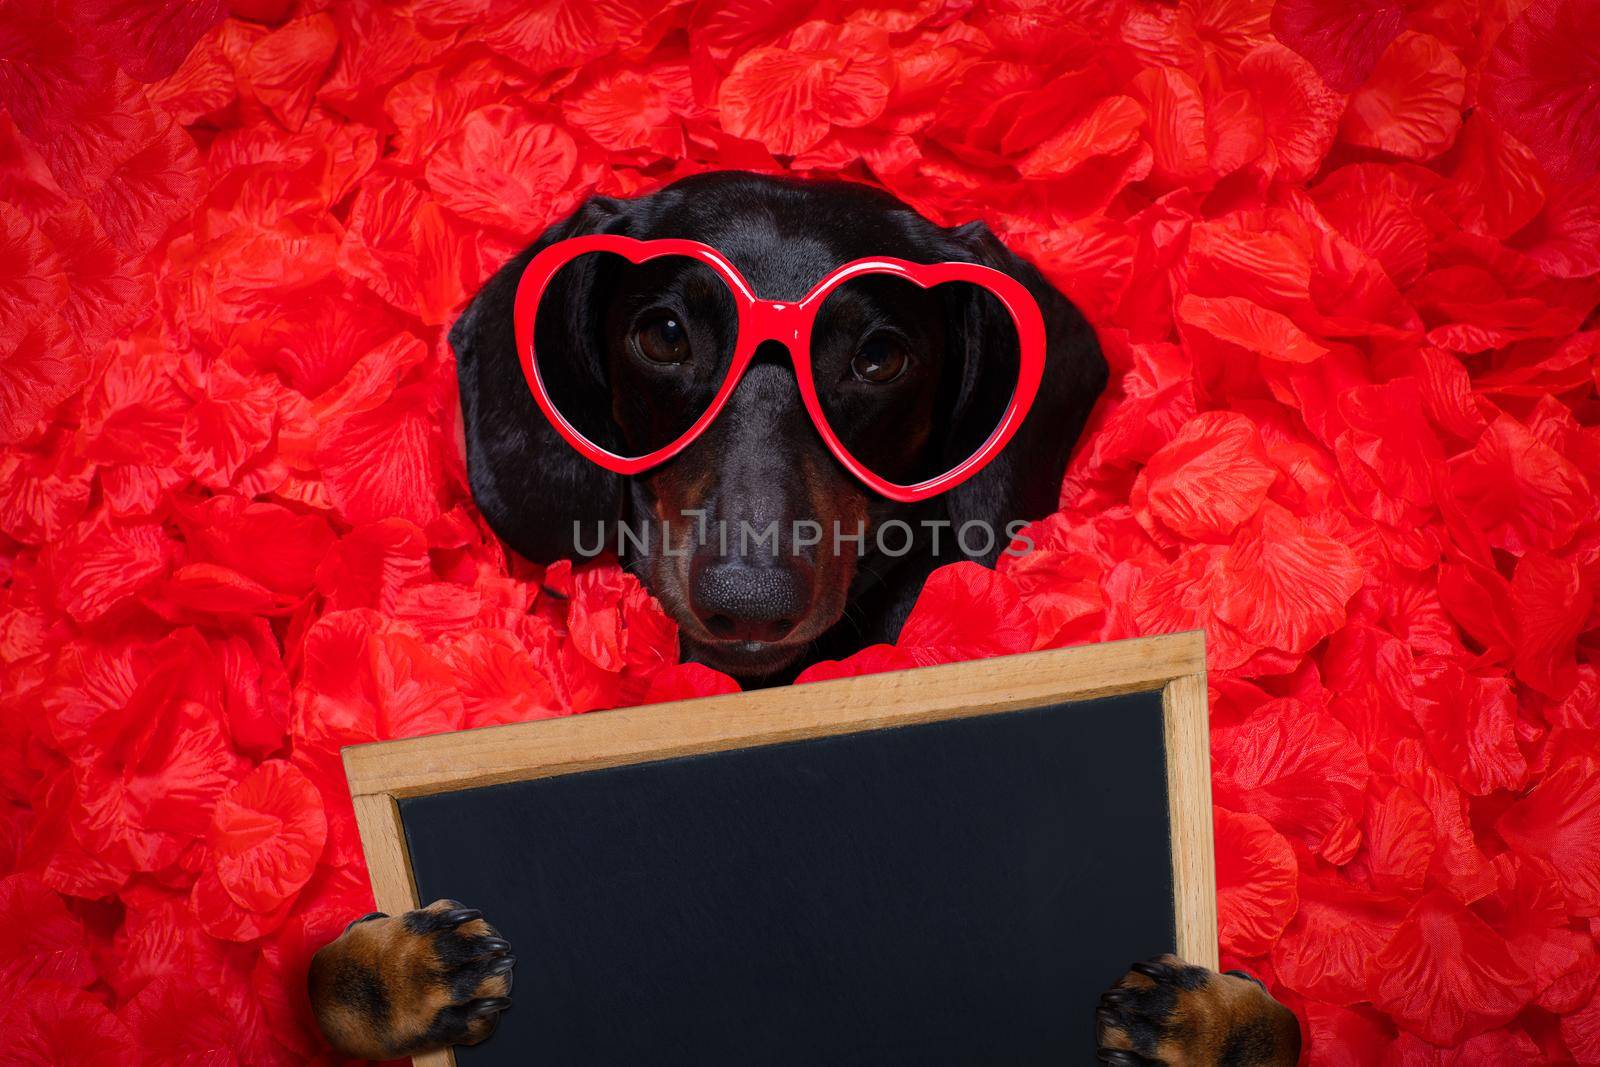 suasage  dachshund dog lying in bed full of red rose flower petals as background  , in love on valentines day and so cute with sunglasses holding a banner or placard